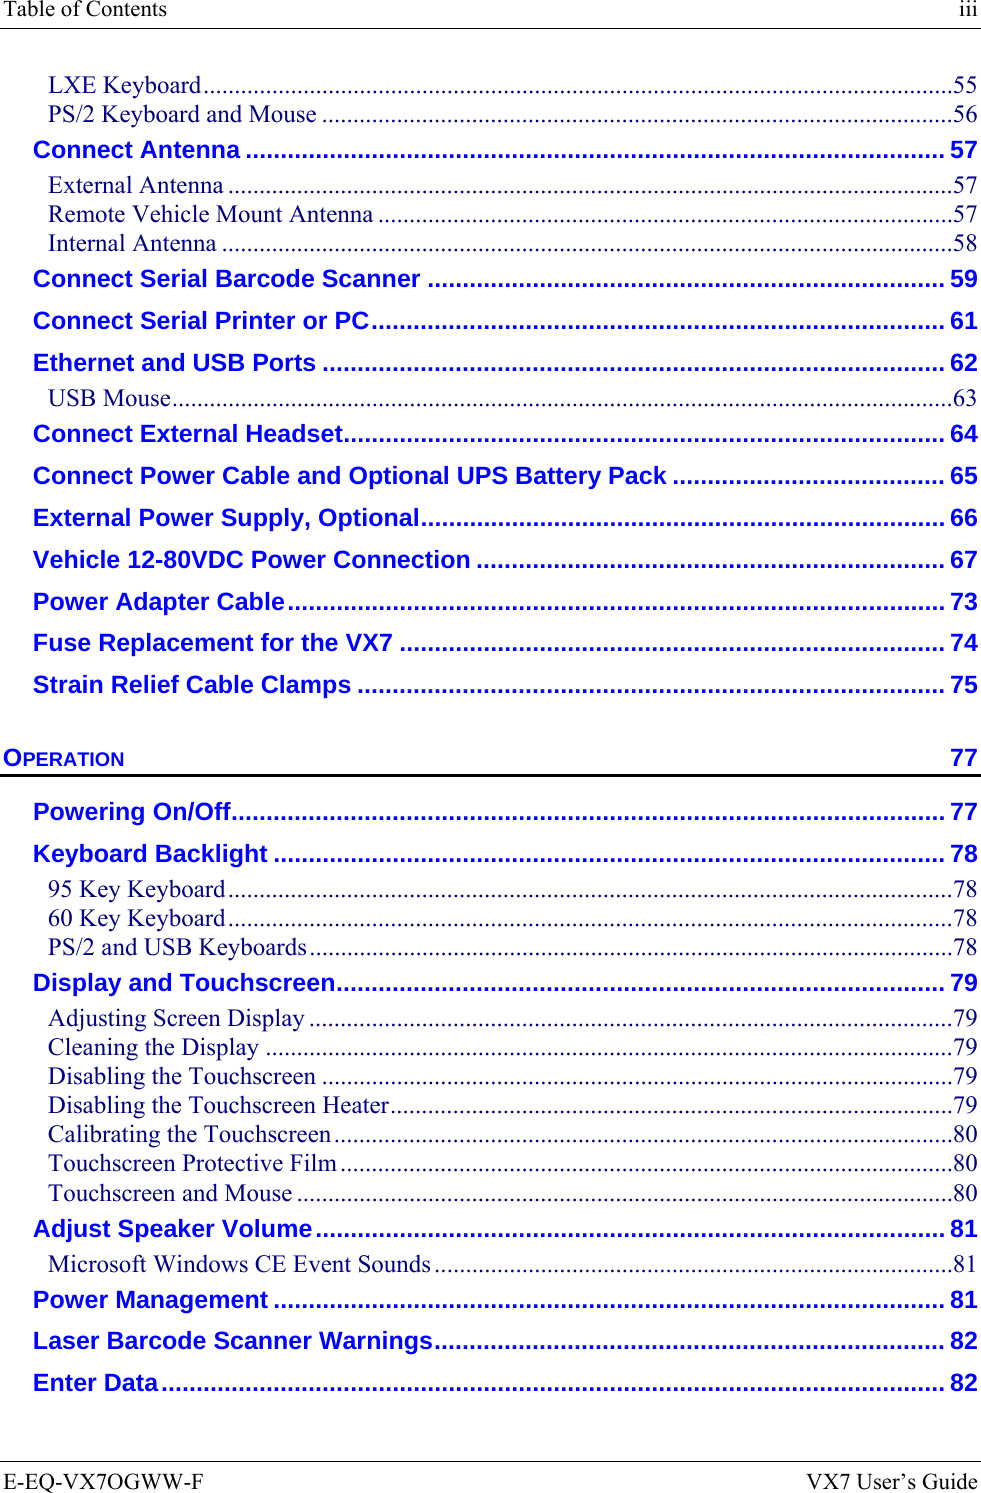 Table of Contents    iii E-EQ-VX7OGWW-F  VX7 User’s Guide LXE Keyboard........................................................................................................................55 PS/2 Keyboard and Mouse .....................................................................................................56 Connect Antenna .................................................................................................... 57 External Antenna ....................................................................................................................57 Remote Vehicle Mount Antenna ............................................................................................57 Internal Antenna .....................................................................................................................58 Connect Serial Barcode Scanner .......................................................................... 59 Connect Serial Printer or PC.................................................................................. 61 Ethernet and USB Ports ......................................................................................... 62 USB Mouse.............................................................................................................................63 Connect External Headset...................................................................................... 64 Connect Power Cable and Optional UPS Battery Pack ....................................... 65 External Power Supply, Optional........................................................................... 66 Vehicle 12-80VDC Power Connection ................................................................... 67 Power Adapter Cable.............................................................................................. 73 Fuse Replacement for the VX7 .............................................................................. 74 Strain Relief Cable Clamps .................................................................................... 75 OPERATION 77 Powering On/Off...................................................................................................... 77 Keyboard Backlight ................................................................................................ 78 95 Key Keyboard....................................................................................................................78 60 Key Keyboard....................................................................................................................78 PS/2 and USB Keyboards.......................................................................................................78 Display and Touchscreen....................................................................................... 79 Adjusting Screen Display .......................................................................................................79 Cleaning the Display ..............................................................................................................79 Disabling the Touchscreen .....................................................................................................79 Disabling the Touchscreen Heater..........................................................................................79 Calibrating the Touchscreen...................................................................................................80 Touchscreen Protective Film ..................................................................................................80 Touchscreen and Mouse .........................................................................................................80 Adjust Speaker Volume.......................................................................................... 81 Microsoft Windows CE Event Sounds...................................................................................81 Power Management ................................................................................................ 81 Laser Barcode Scanner Warnings......................................................................... 82 Enter Data................................................................................................................ 82 